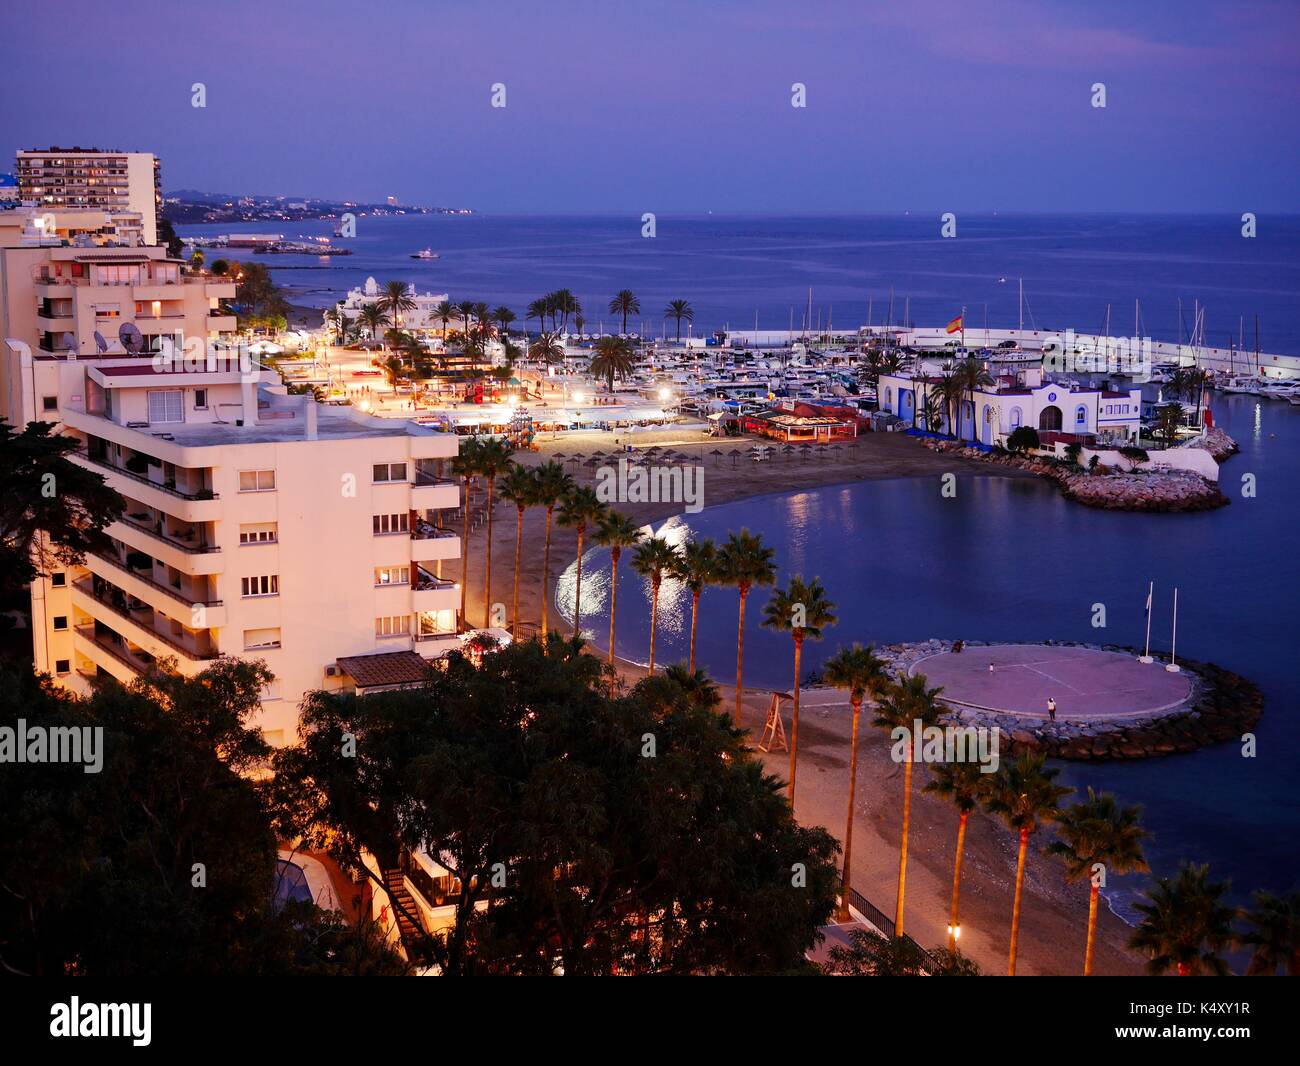 Night time view of the marina at Marbella, Costa del Sol, Spain Stock Photo